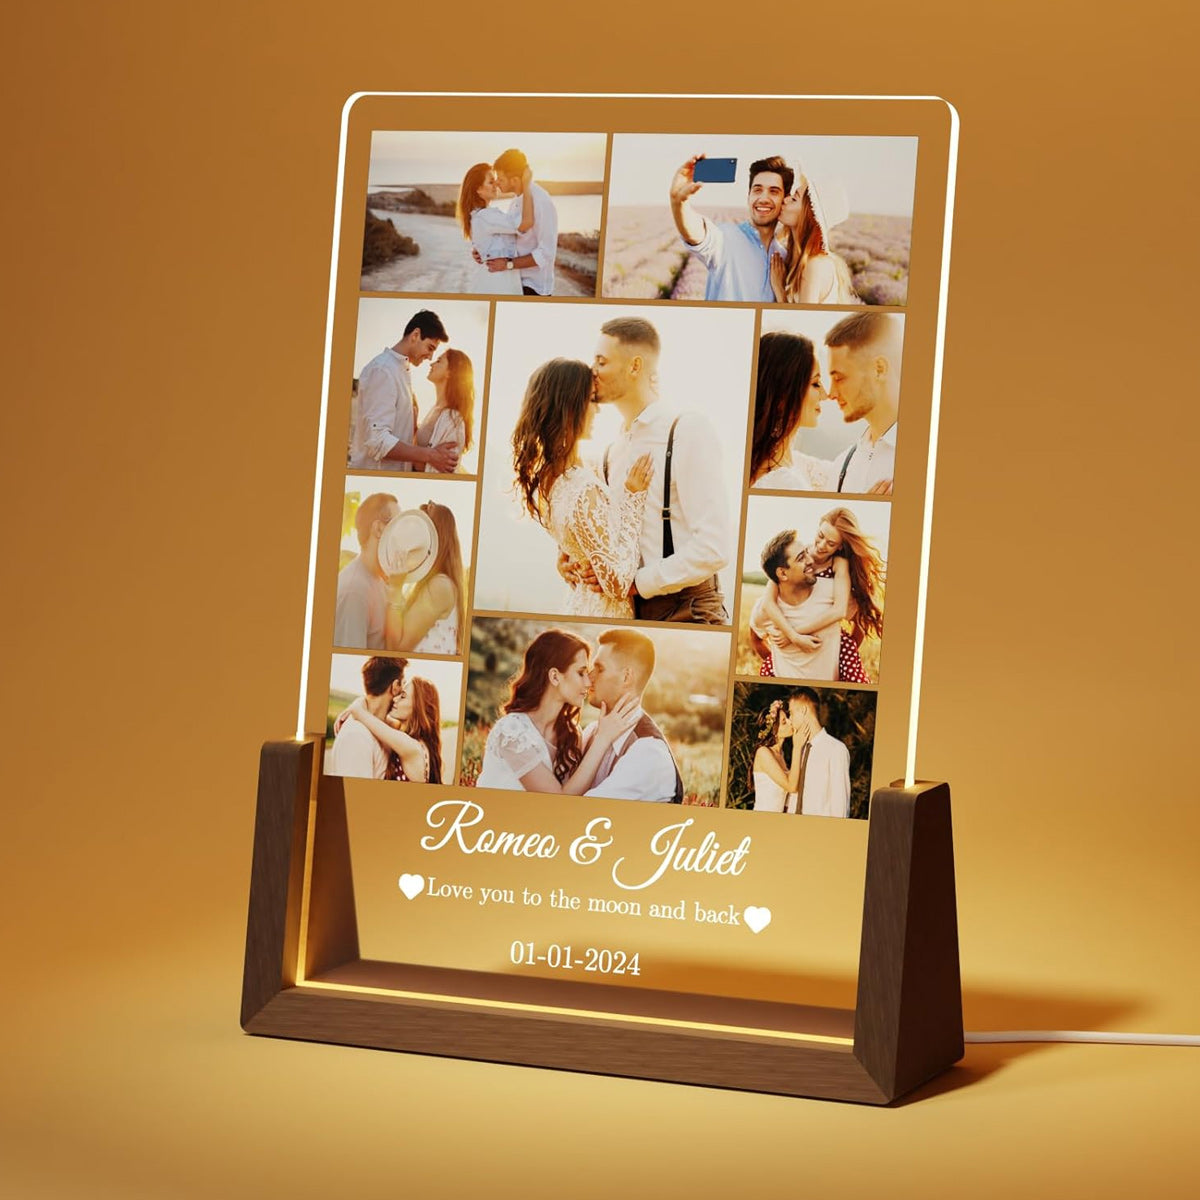 NEONIP-Personalized Night Light with Acrylic Plaque, Customized Gifts with Photos for Friend Boyfriend Girlfriend